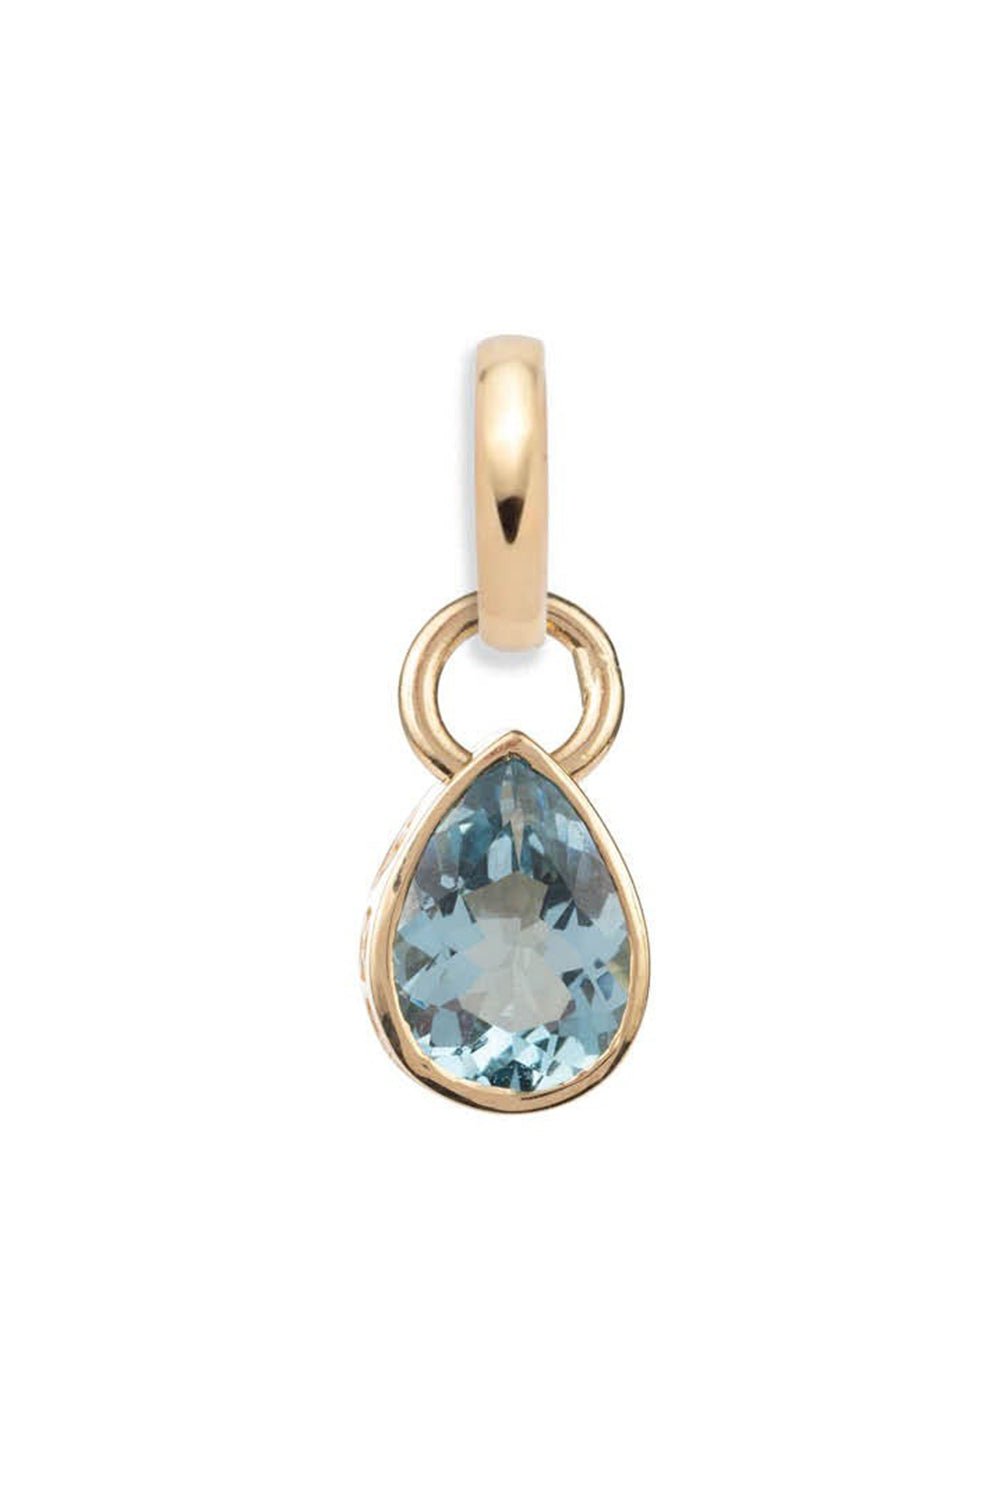 FOUNDRAE-Small Forever And Always A Pair Aquamarine Pear Pendant - Love-YELLOW GOLD